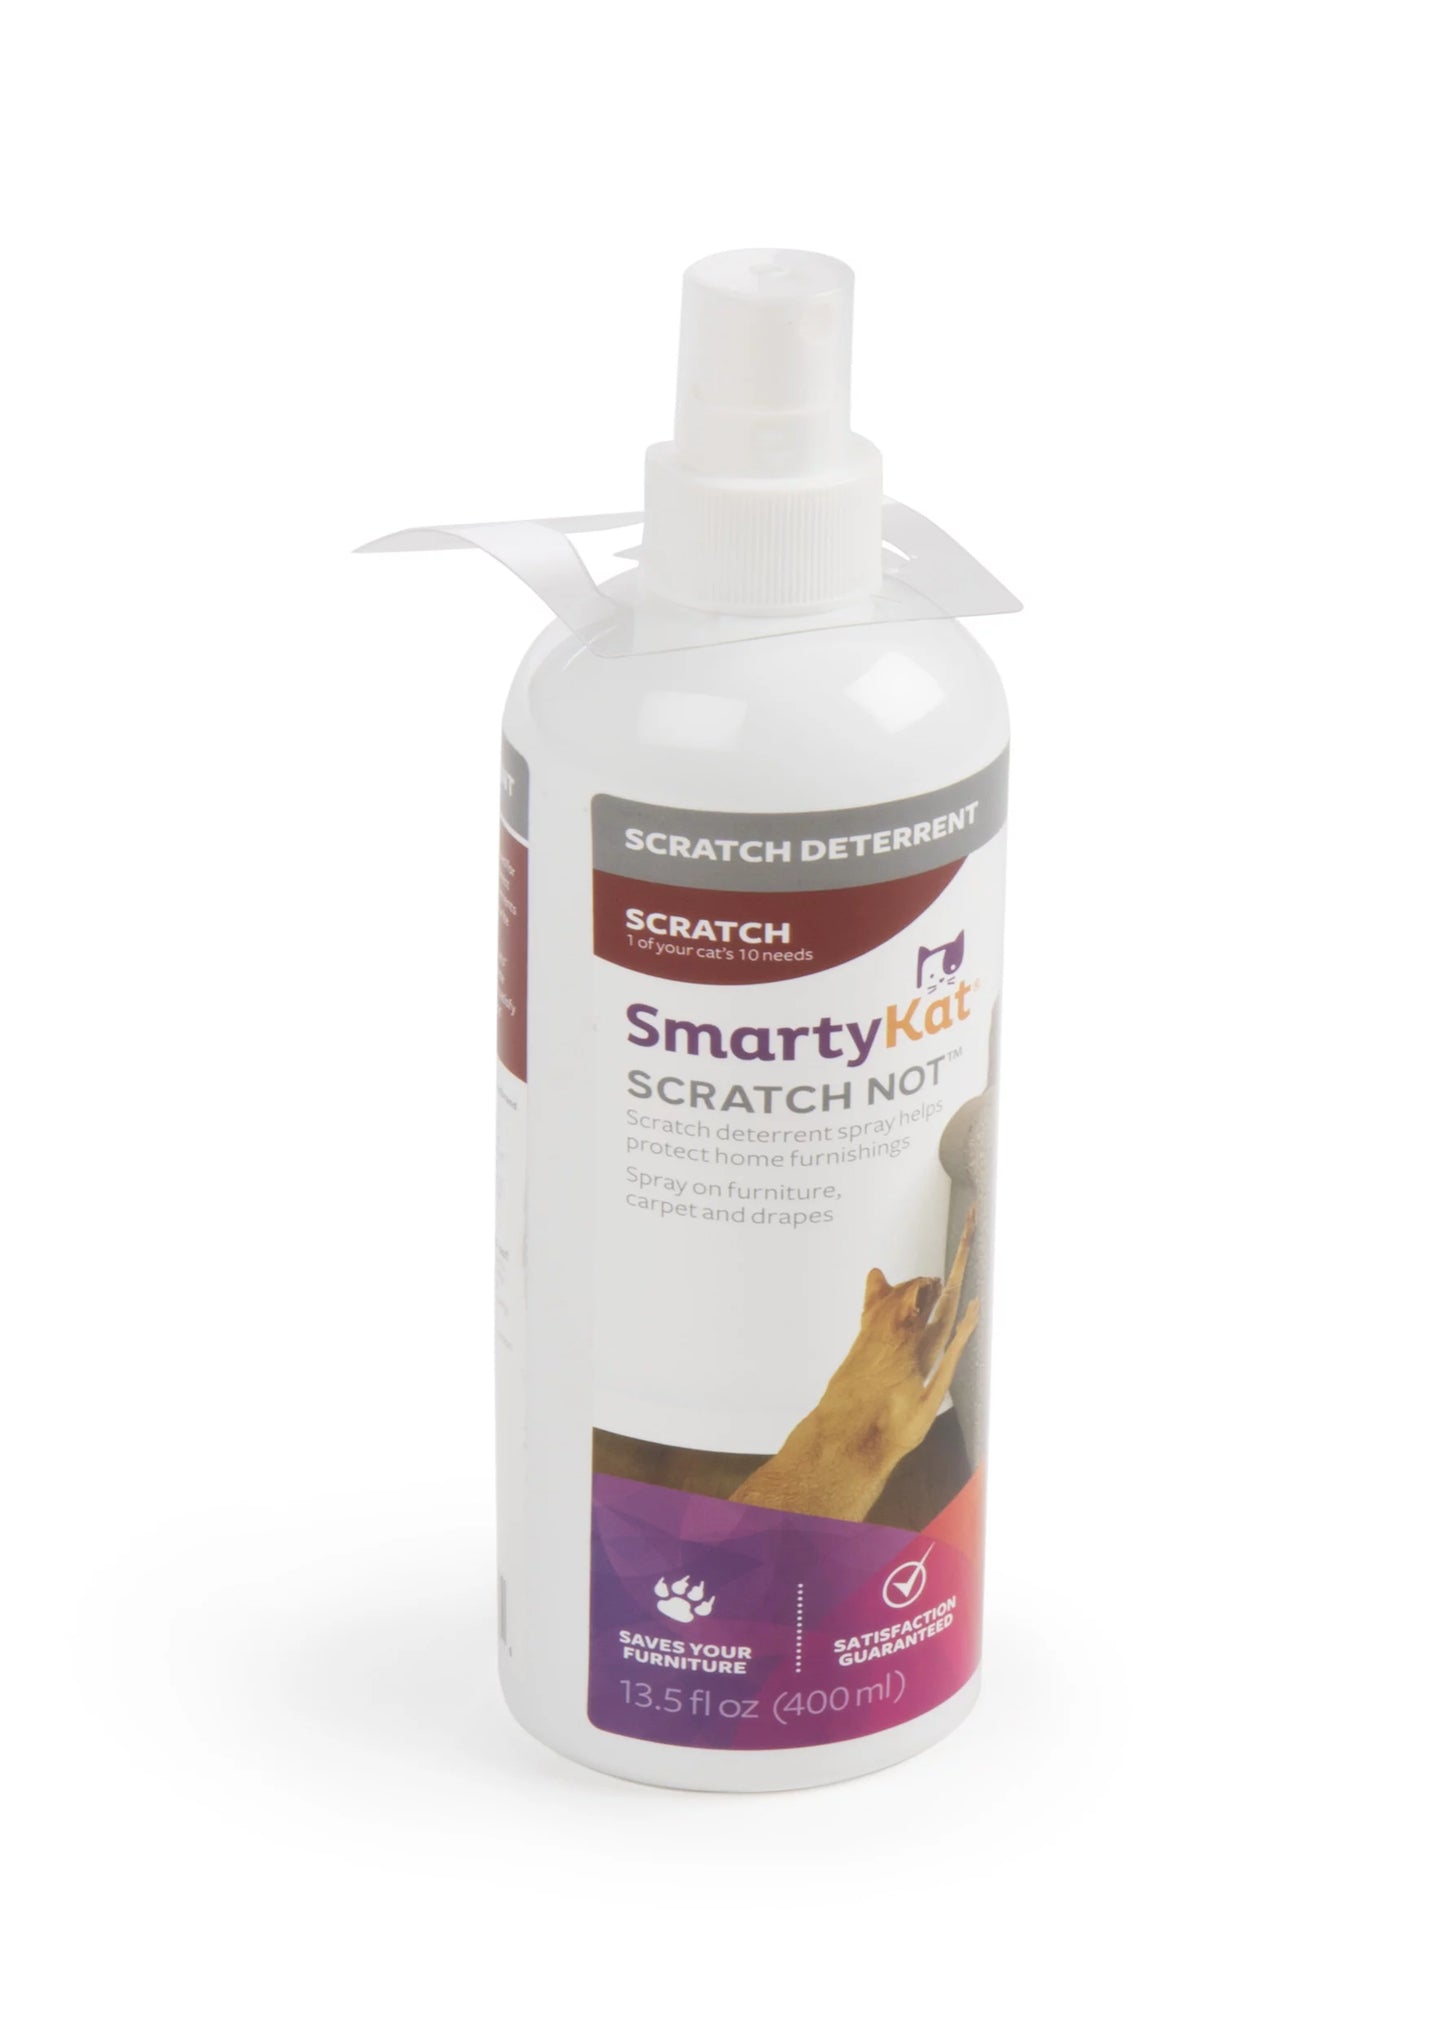 Smartykat Scratch Not Cat Spray, Anti-Scratch Cat Training Spray & Scratch Deterrent, Protects Furniture & Safe for Cats, 13.5 Ounce